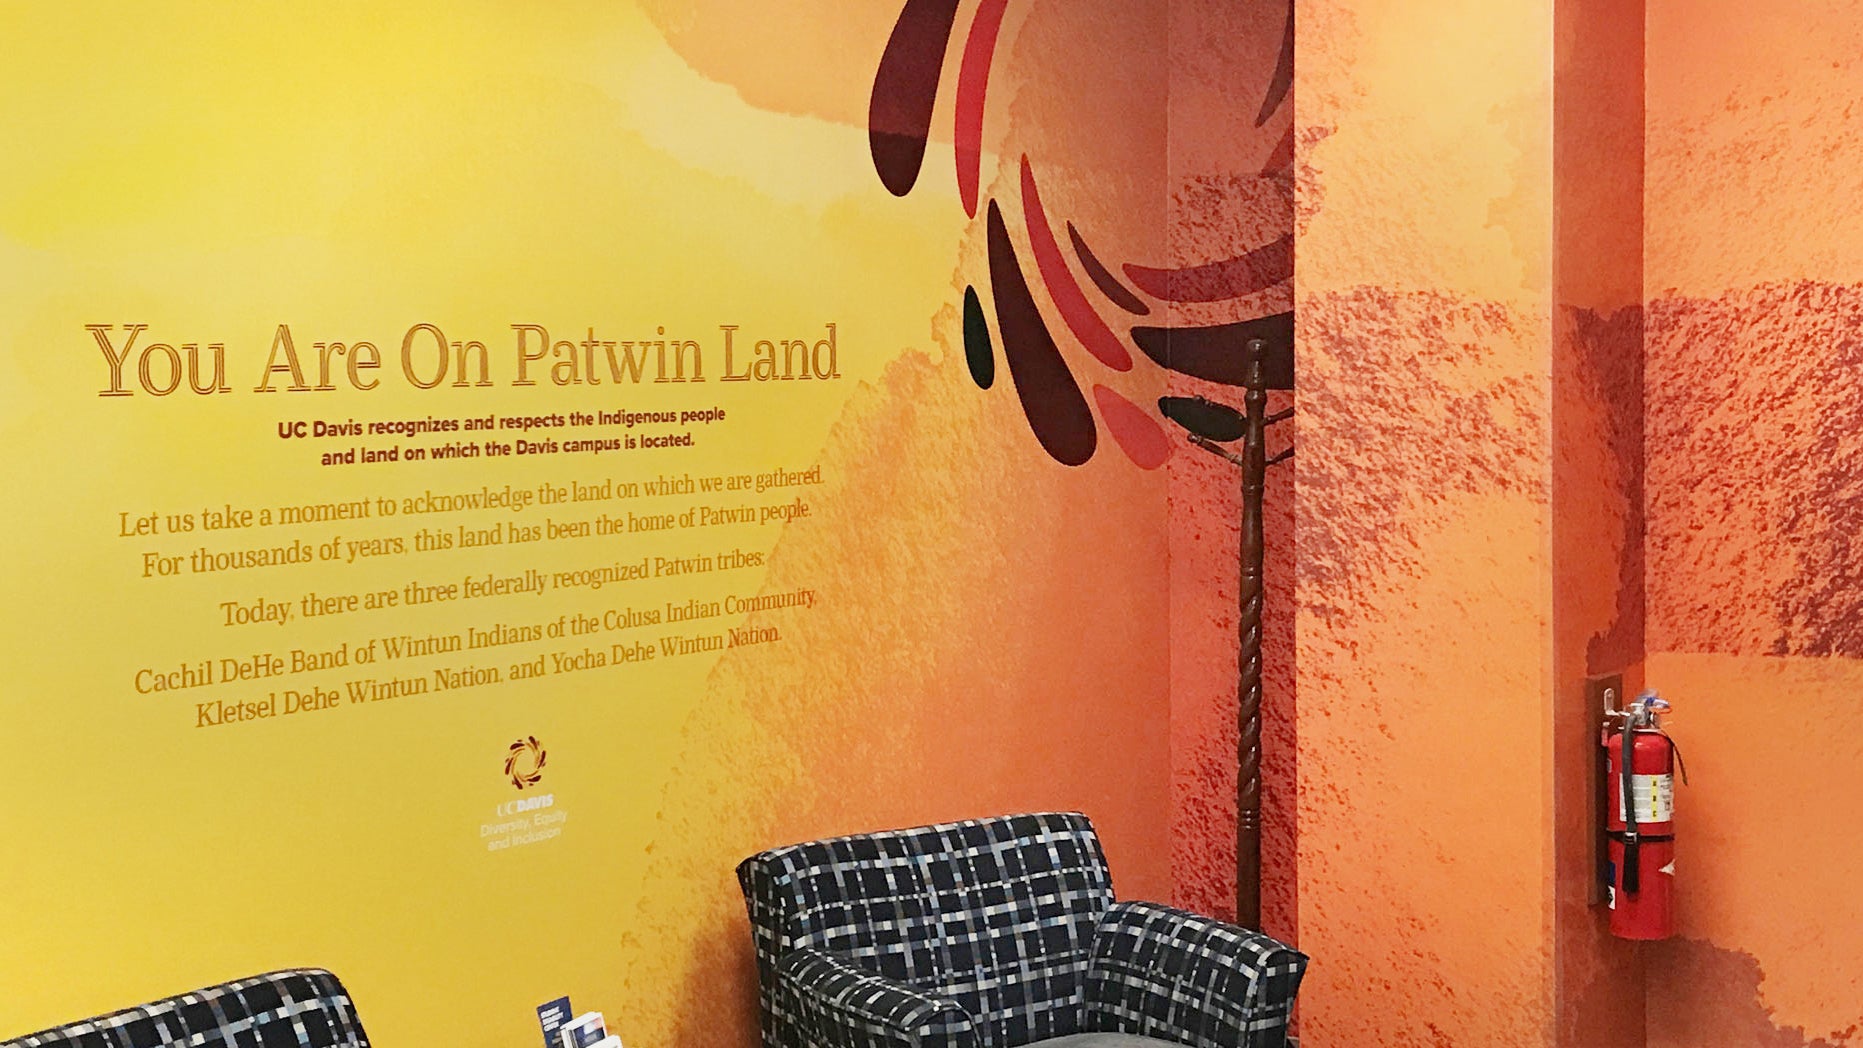 Diversity, Equity and Inclusion office wrap, yellows and oranges, and "You Are on Patwin Land" inscription 